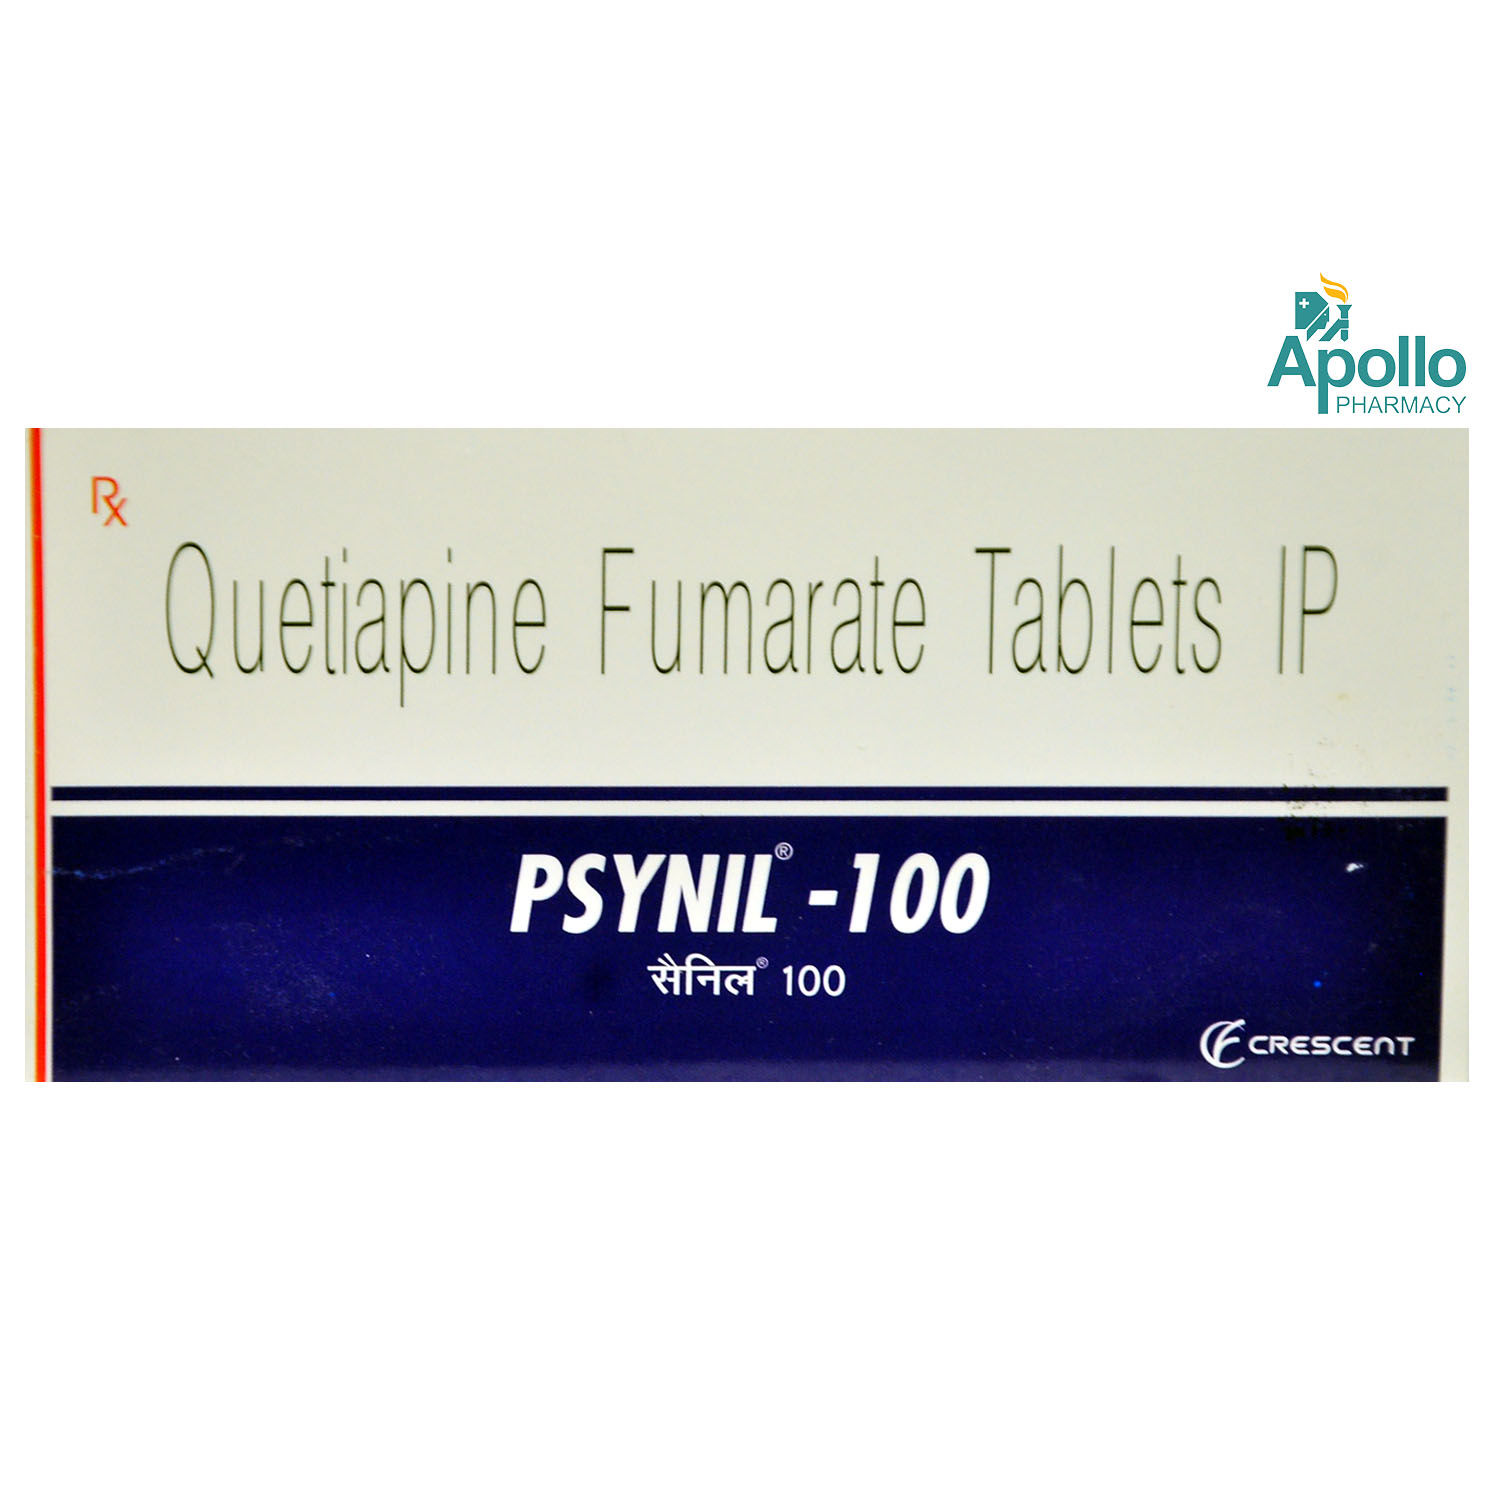 PSYNIL 100MG TABLET, Pack of 10 TABLETS